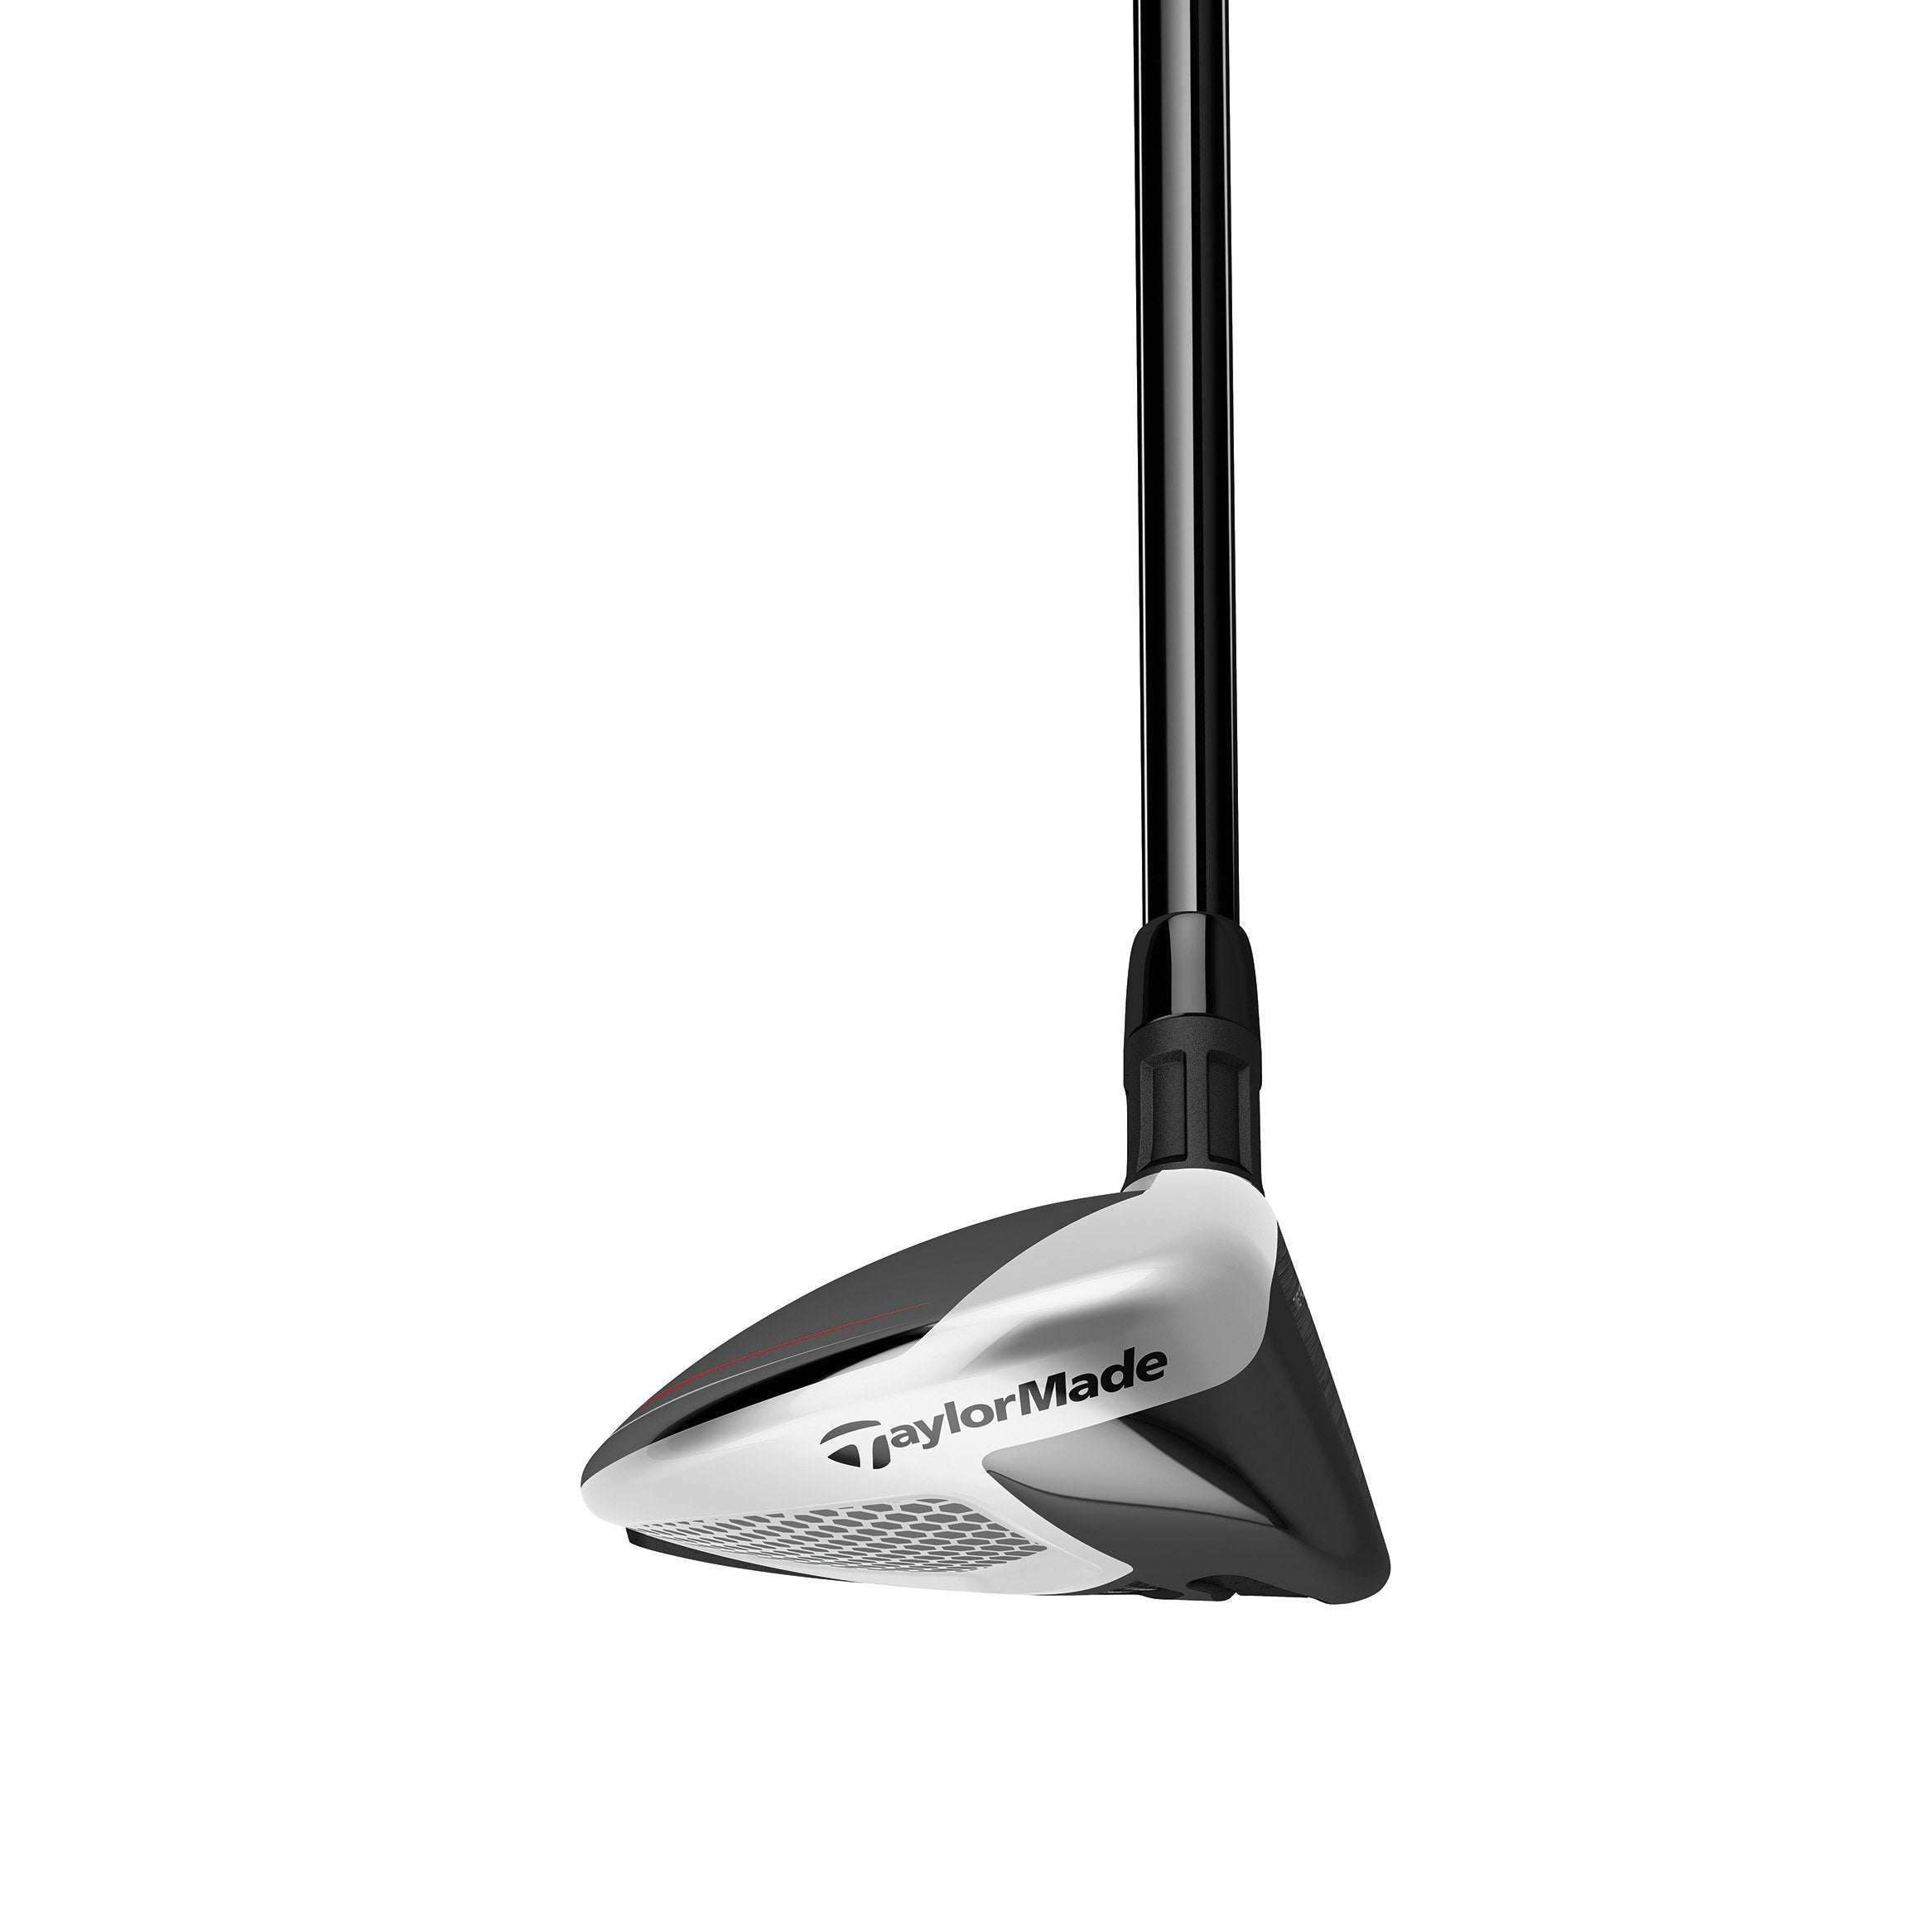 TaylorMade M6